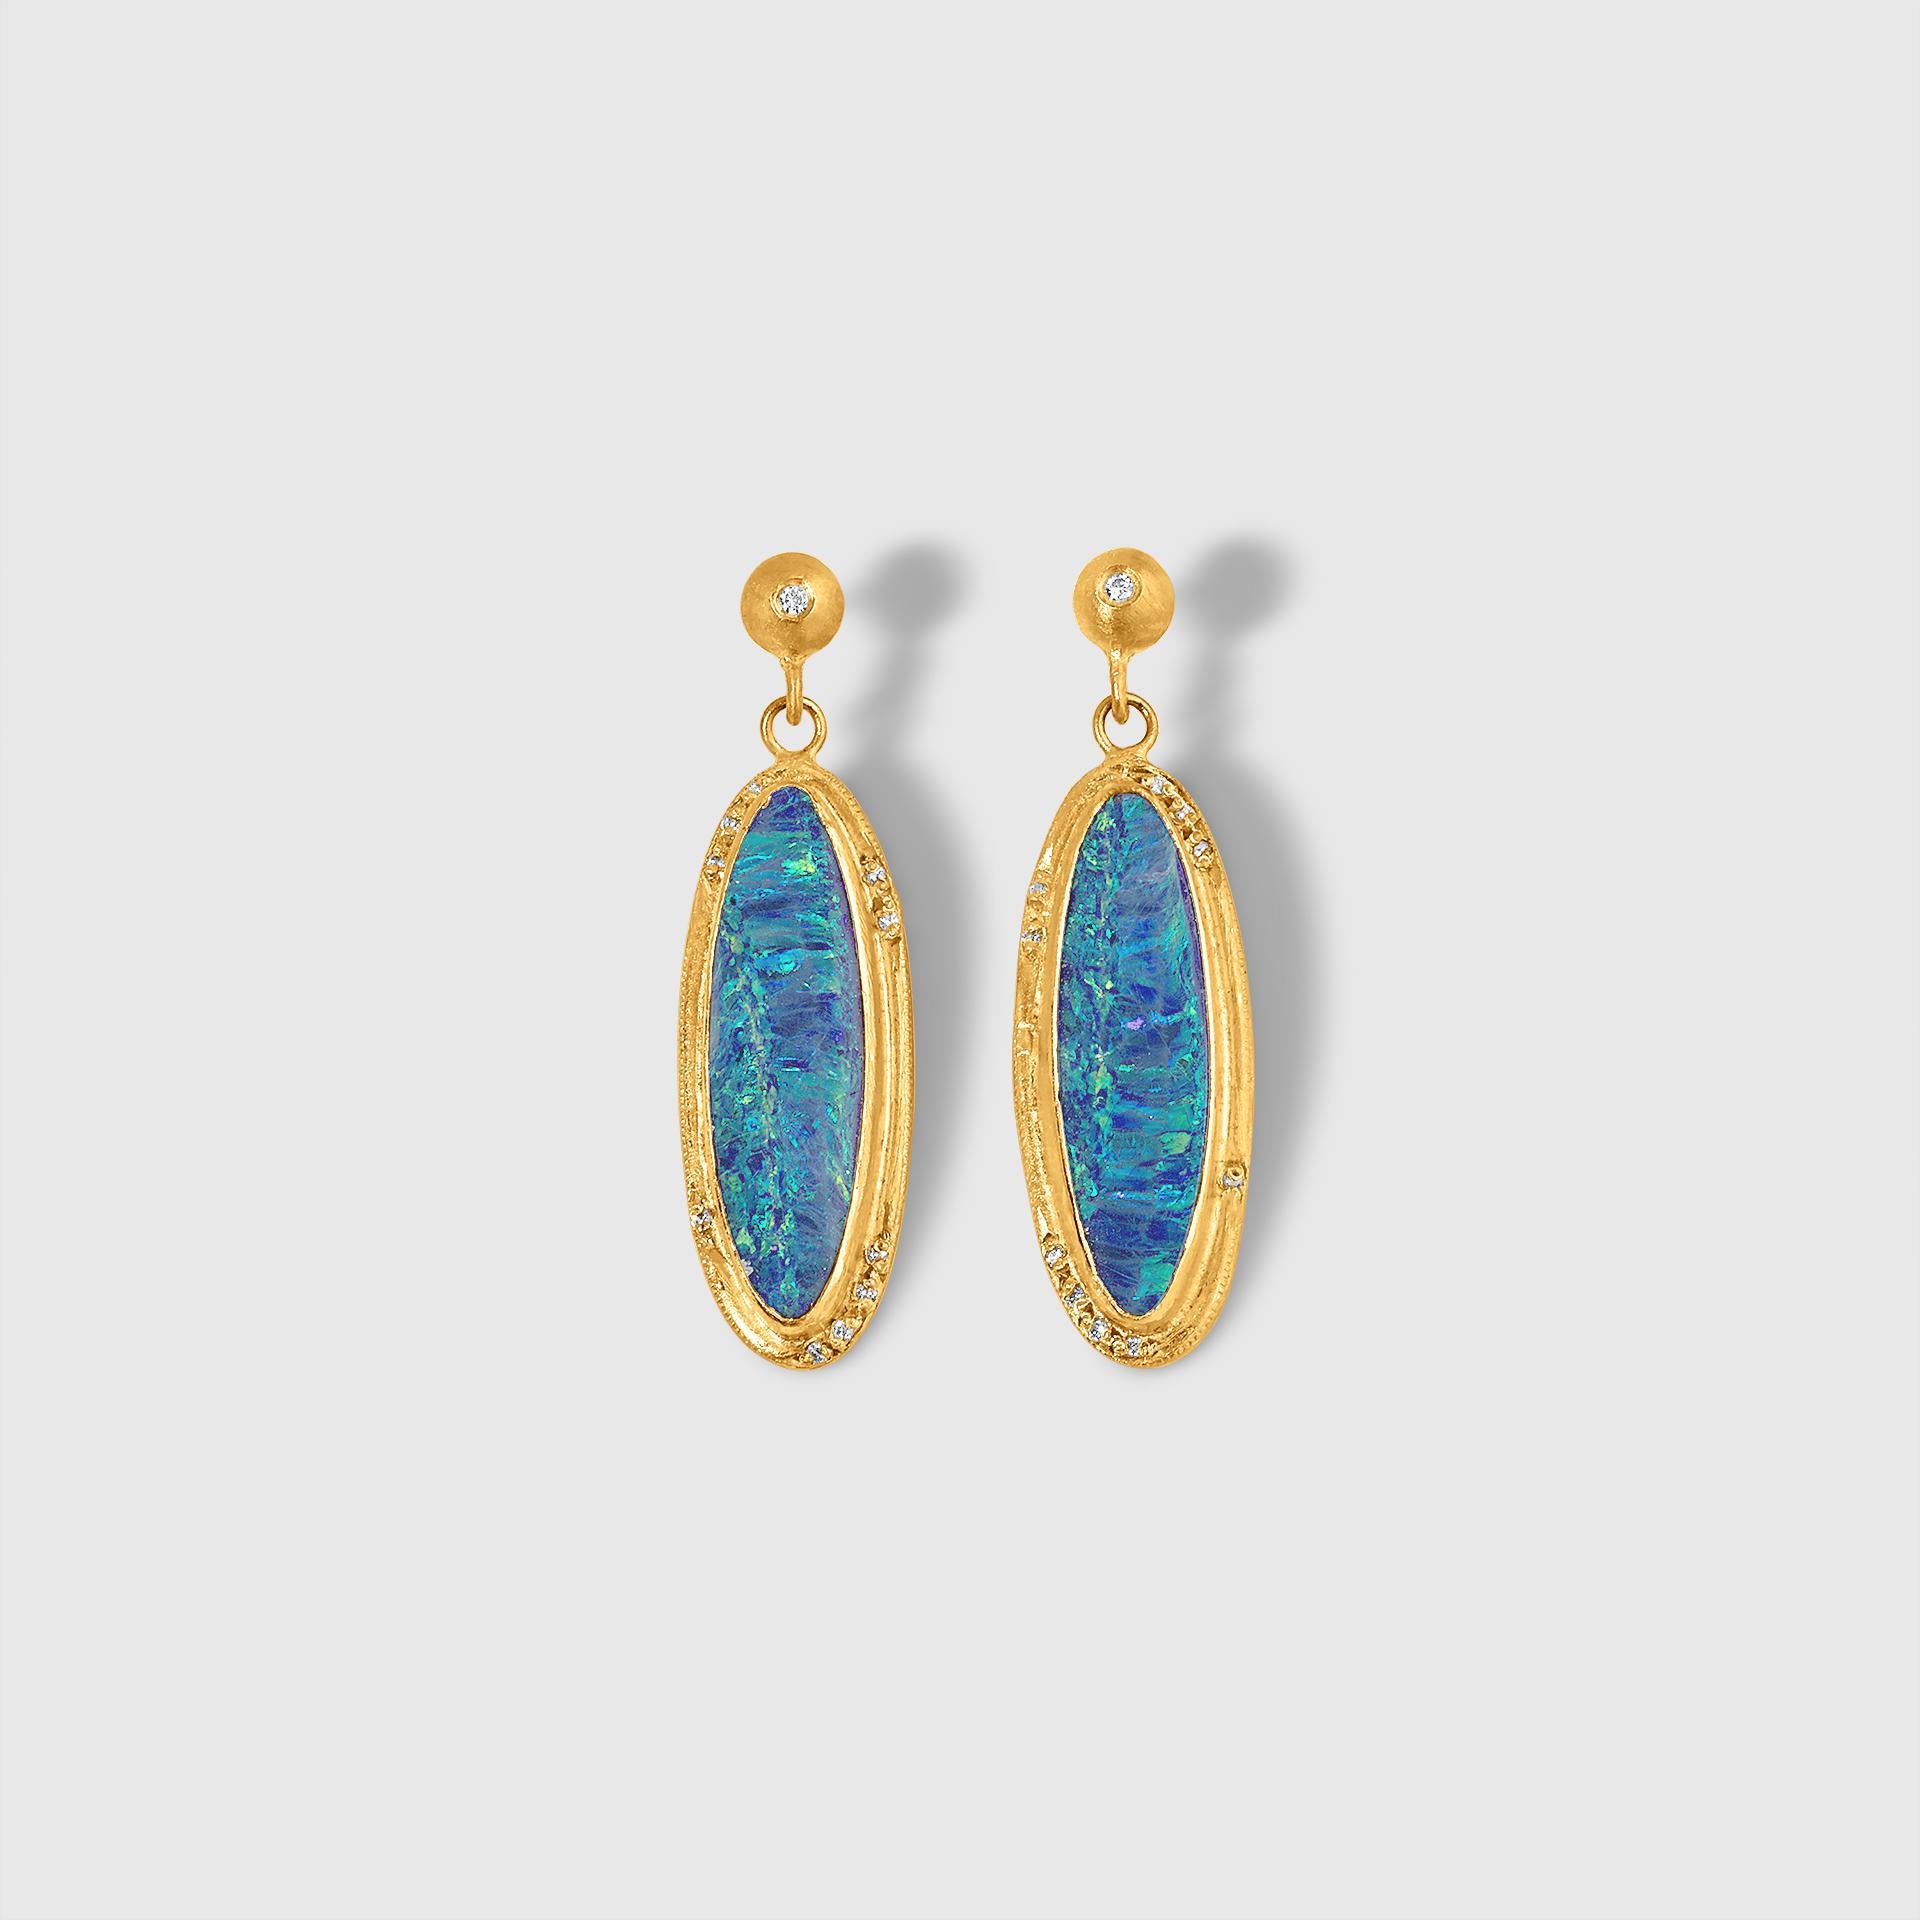 Round Cut Long Oval Doublet 9.26ct Opal Post Earrings with Diamonds 24kt Solid Yellow Gold